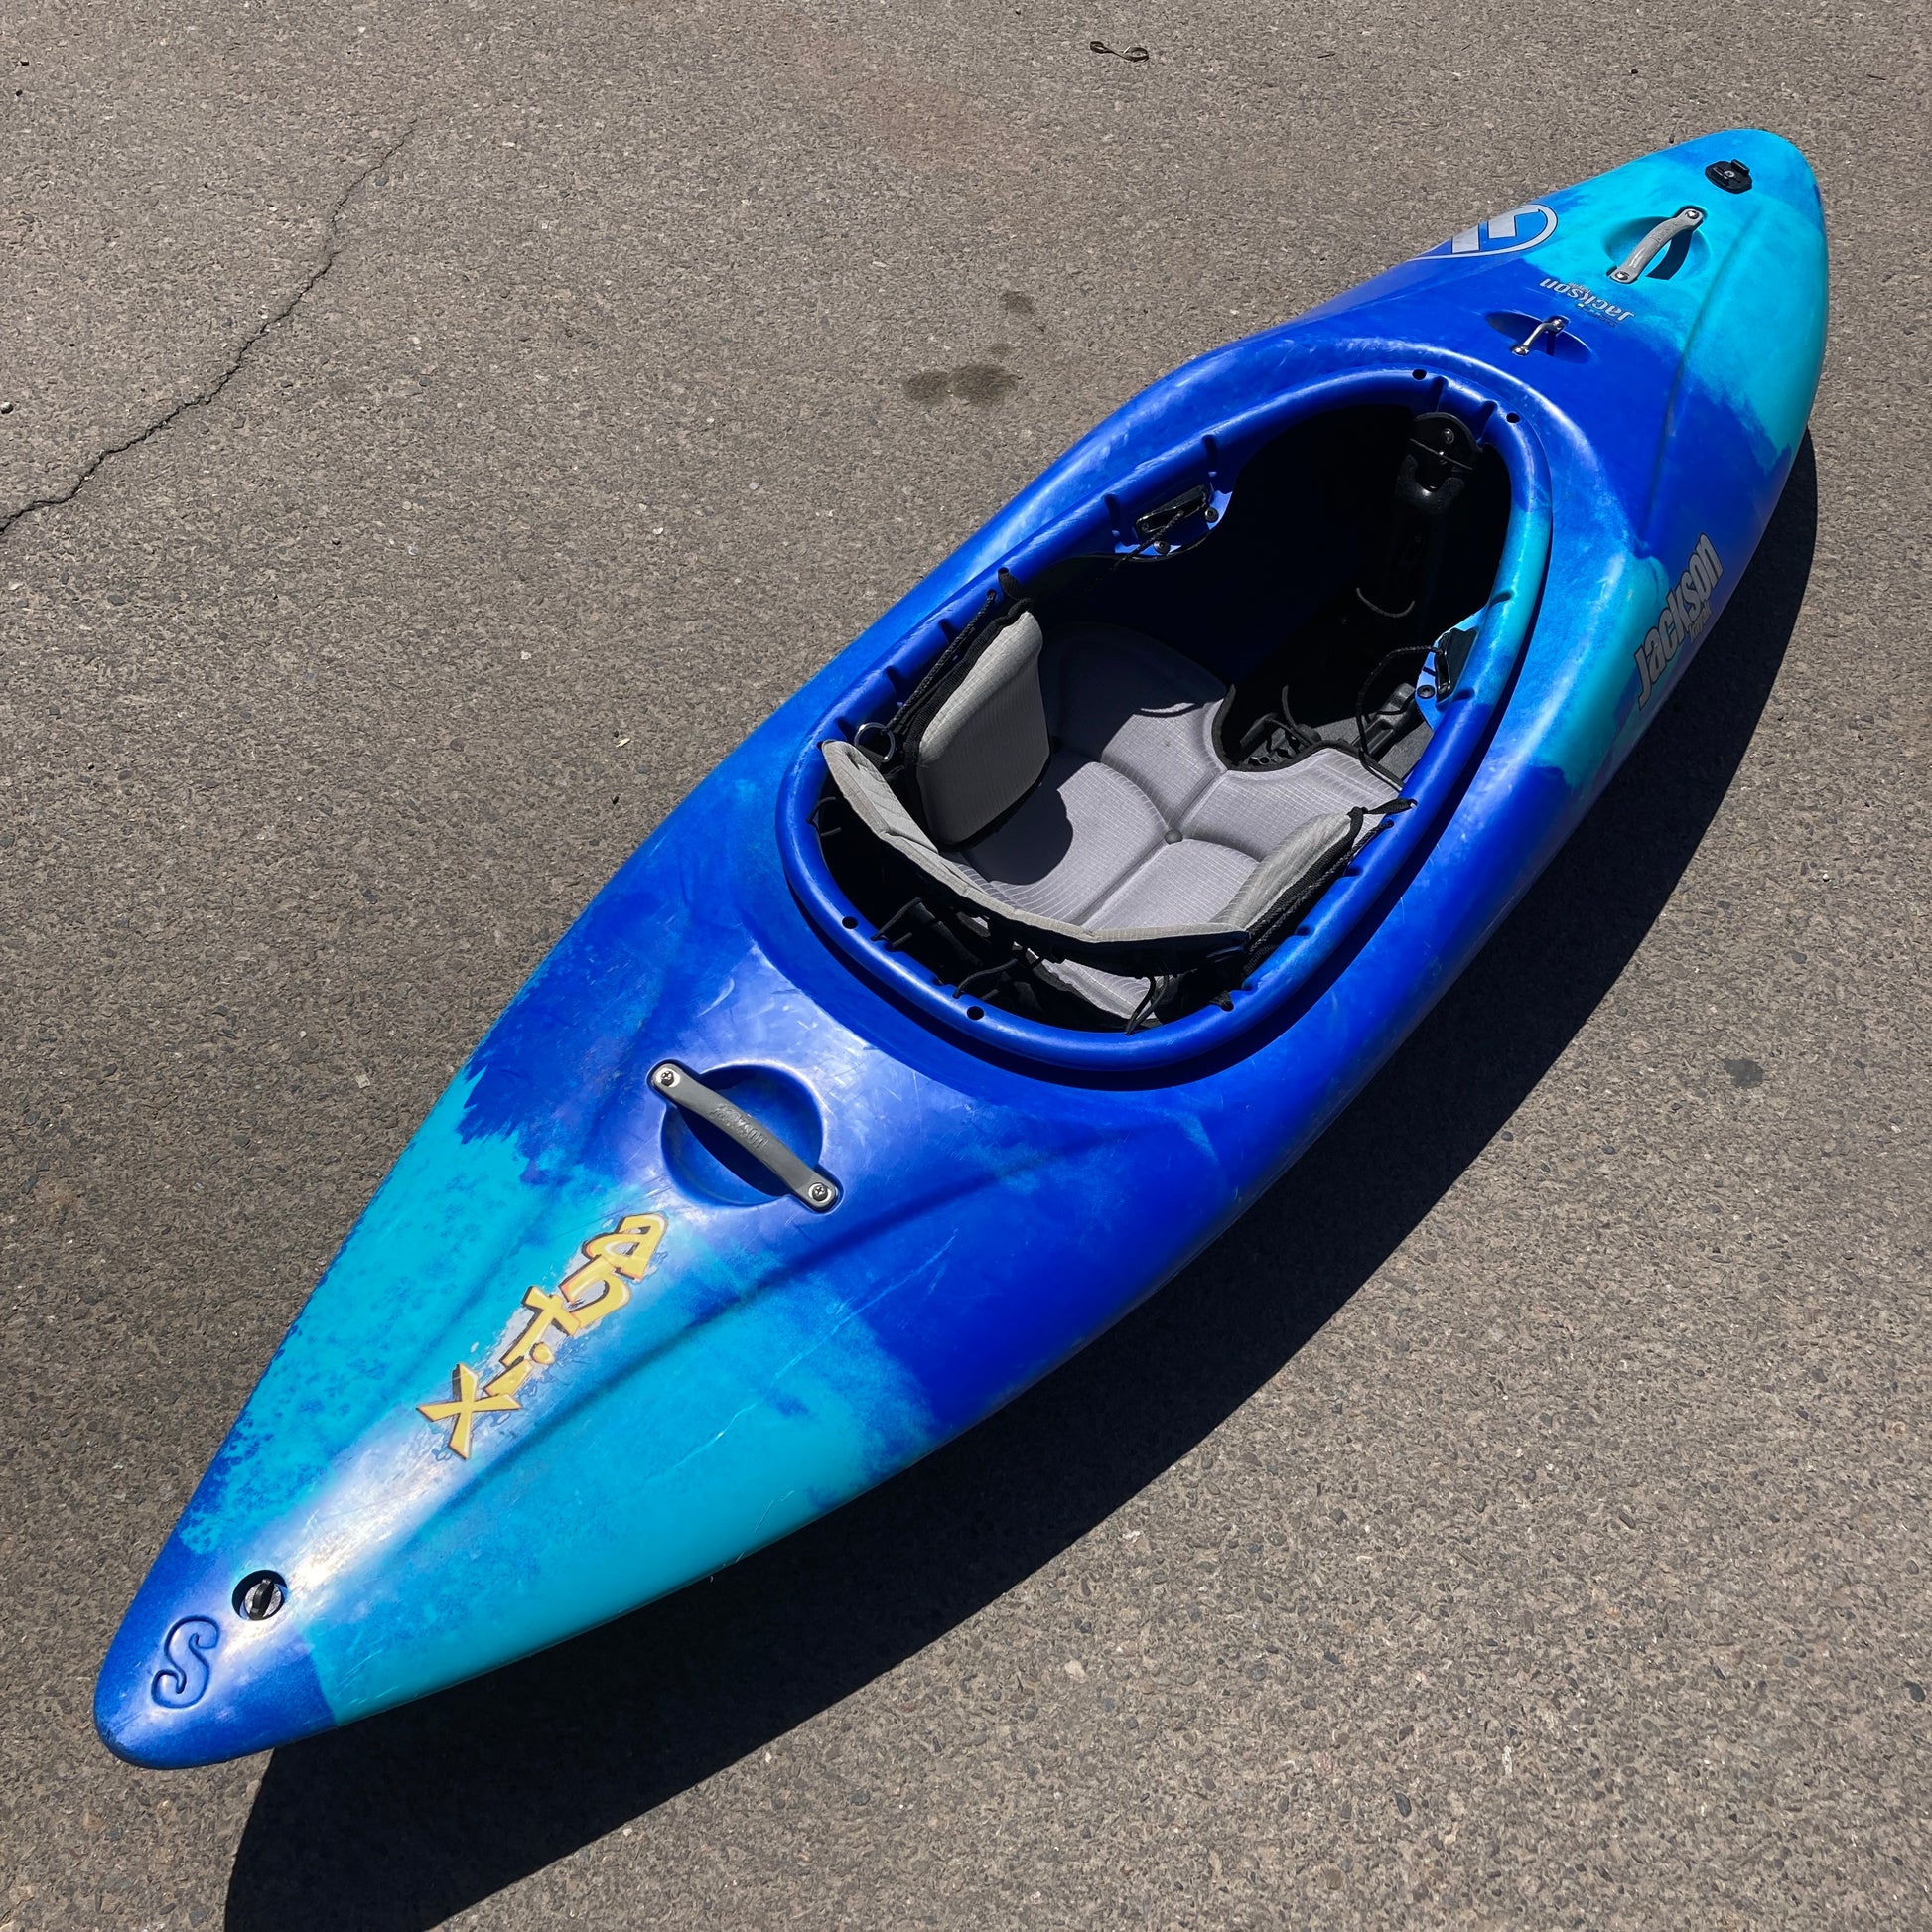 A blue Consignment Jackson Antix S whitewater kayak by Jackson Kayak with visible river rash and a brand logo, positioned on a sunlit asphalt surface.